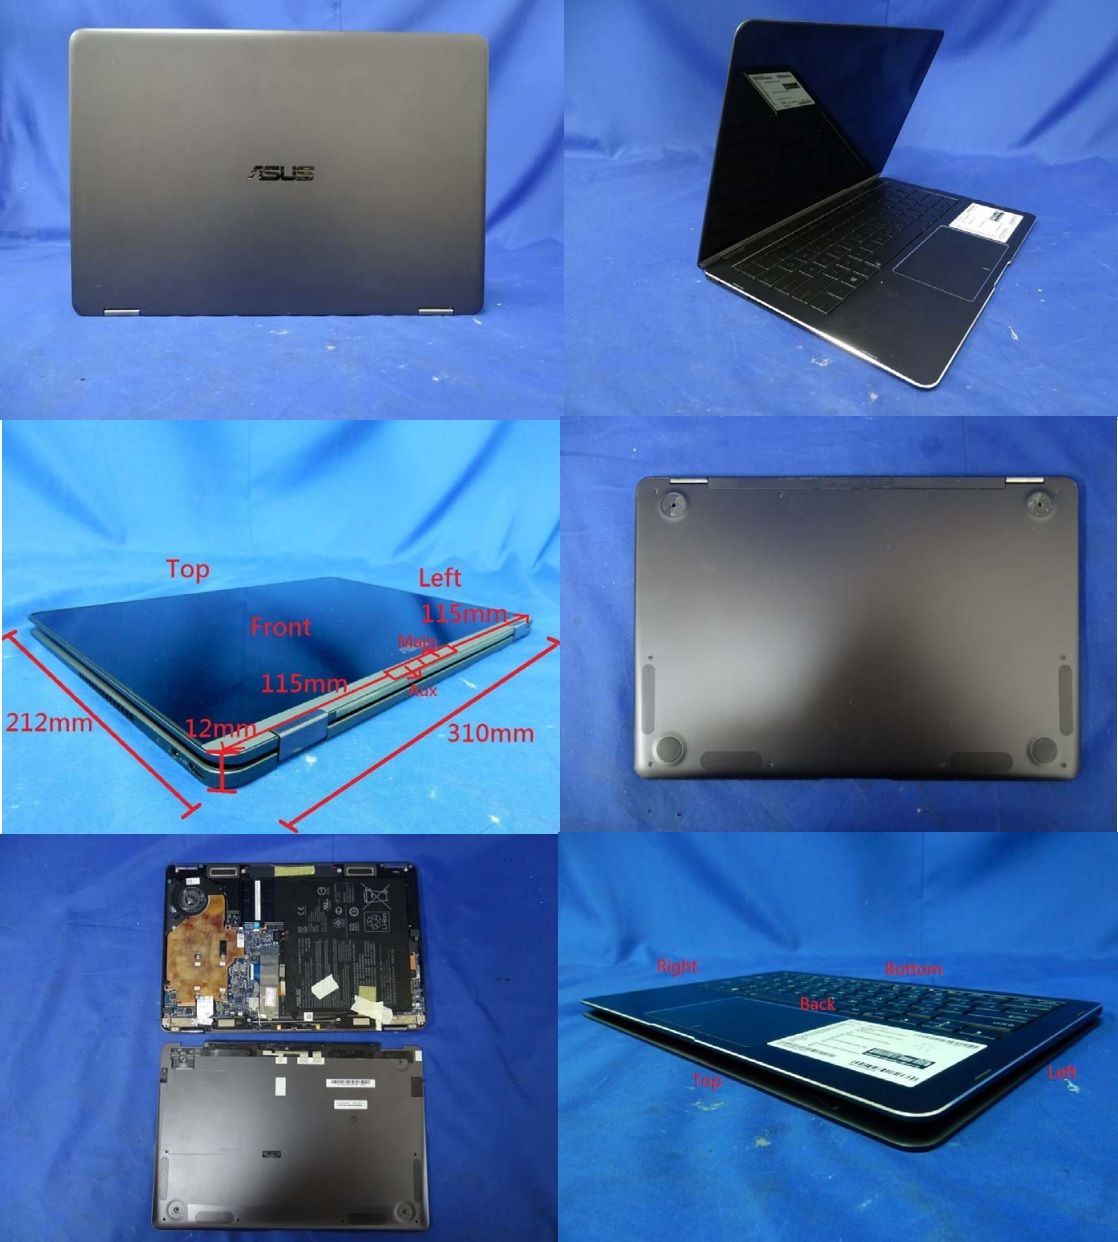 ASUS ZENBOOK FLIP UX370UA, ASUS ZENBOOK FLIP UX370UA (Q325UA) PHOTOS AND TECHNICAL SPECIFICATIONS, 